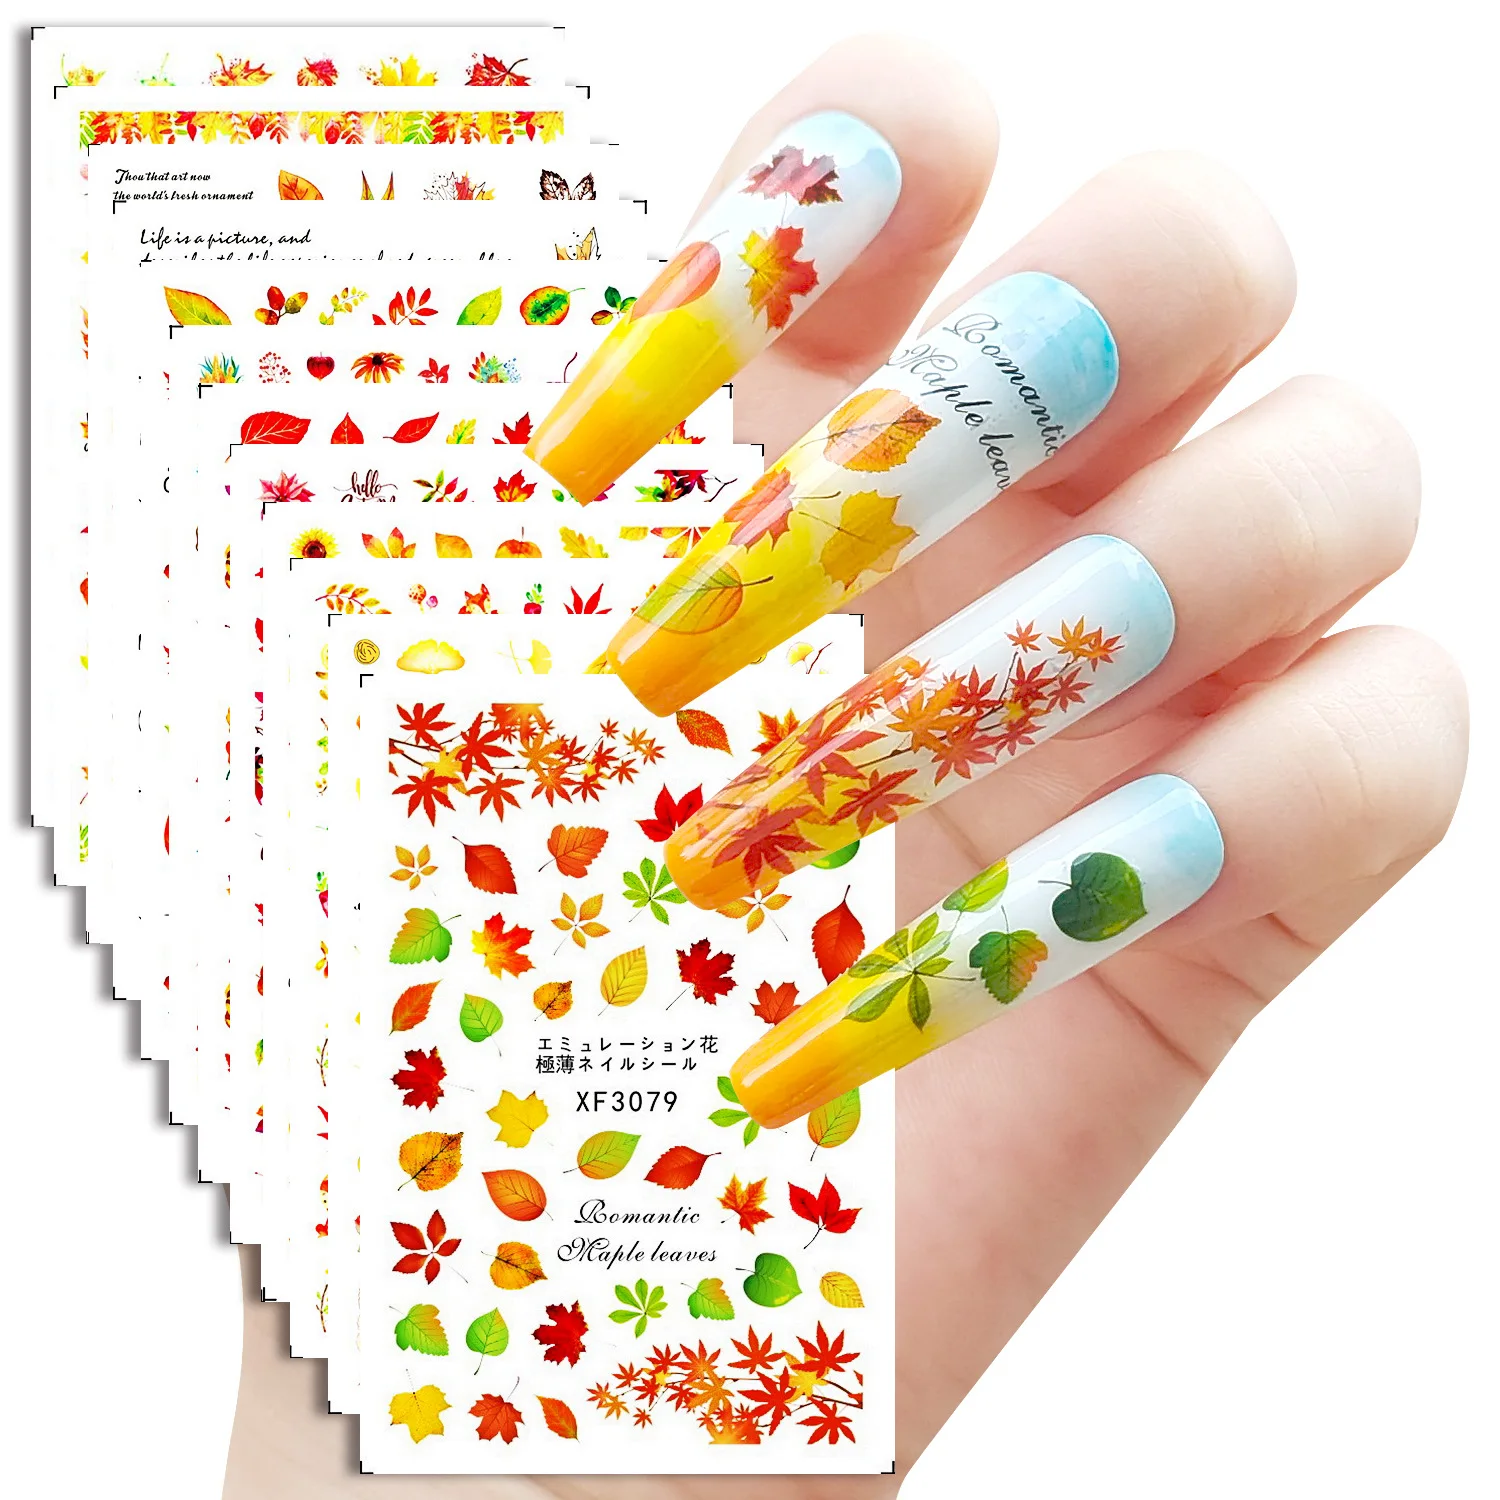 

1pcs Autumn Maple Leaf Series Nail Art Decorations Stickers Multi Transfer Nail Sliders Decals DIY Manicure Ornament Accessories